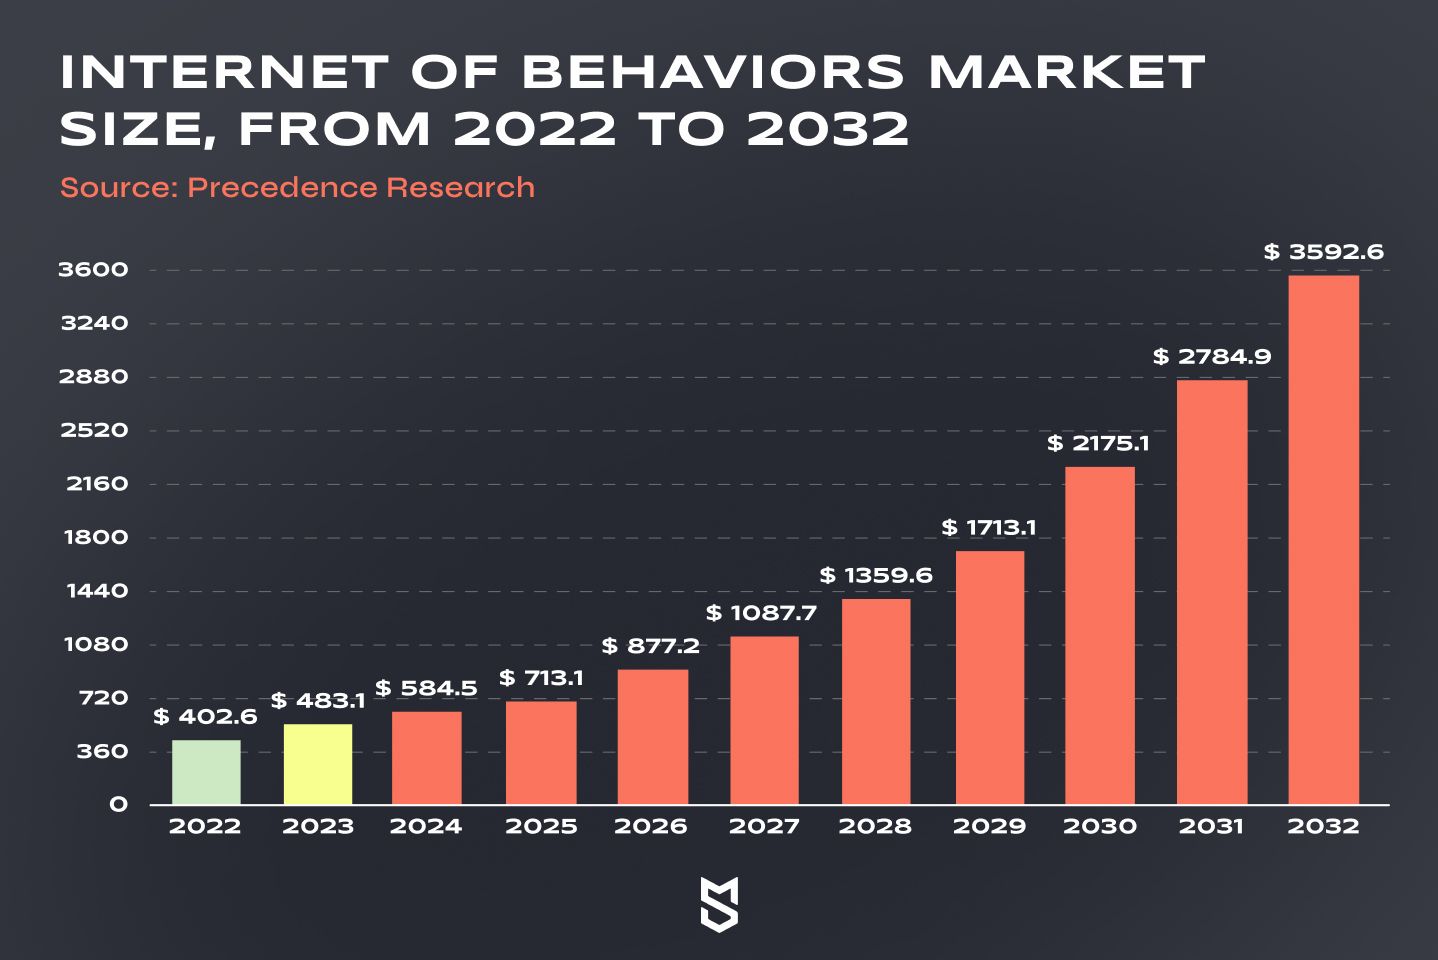 Internet of Behaviors market size, from 2022 to 2032